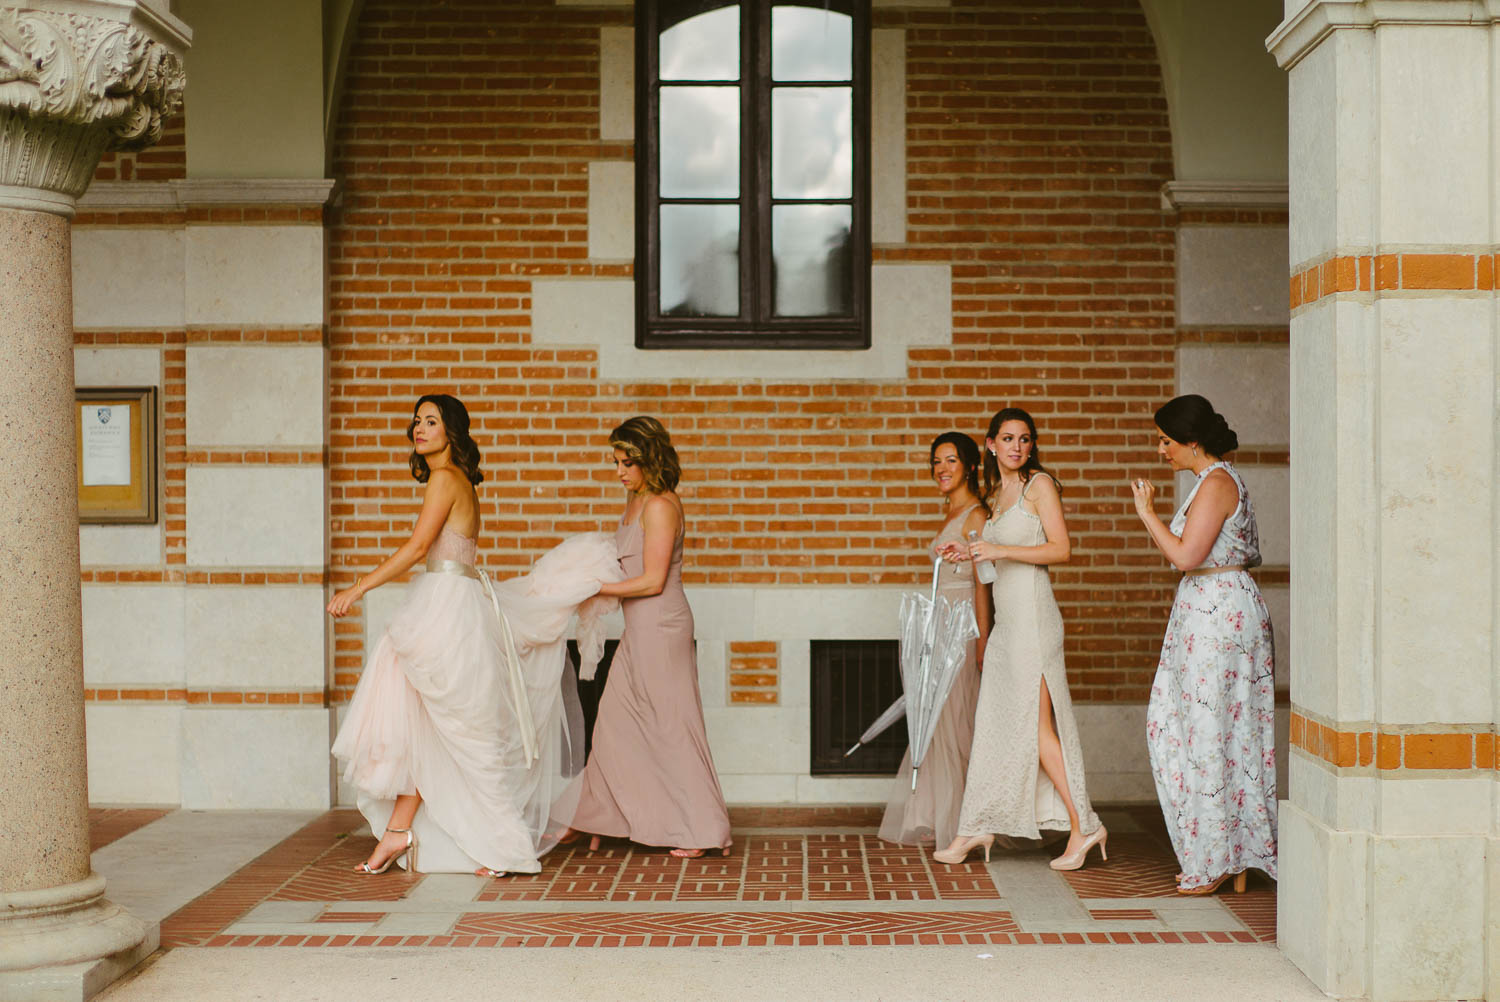 In-between heavy spring showers, the bride and bridesmaid stay sheltered at Rice University Houston Texas -Leica photographer-Philip Thomas Photography